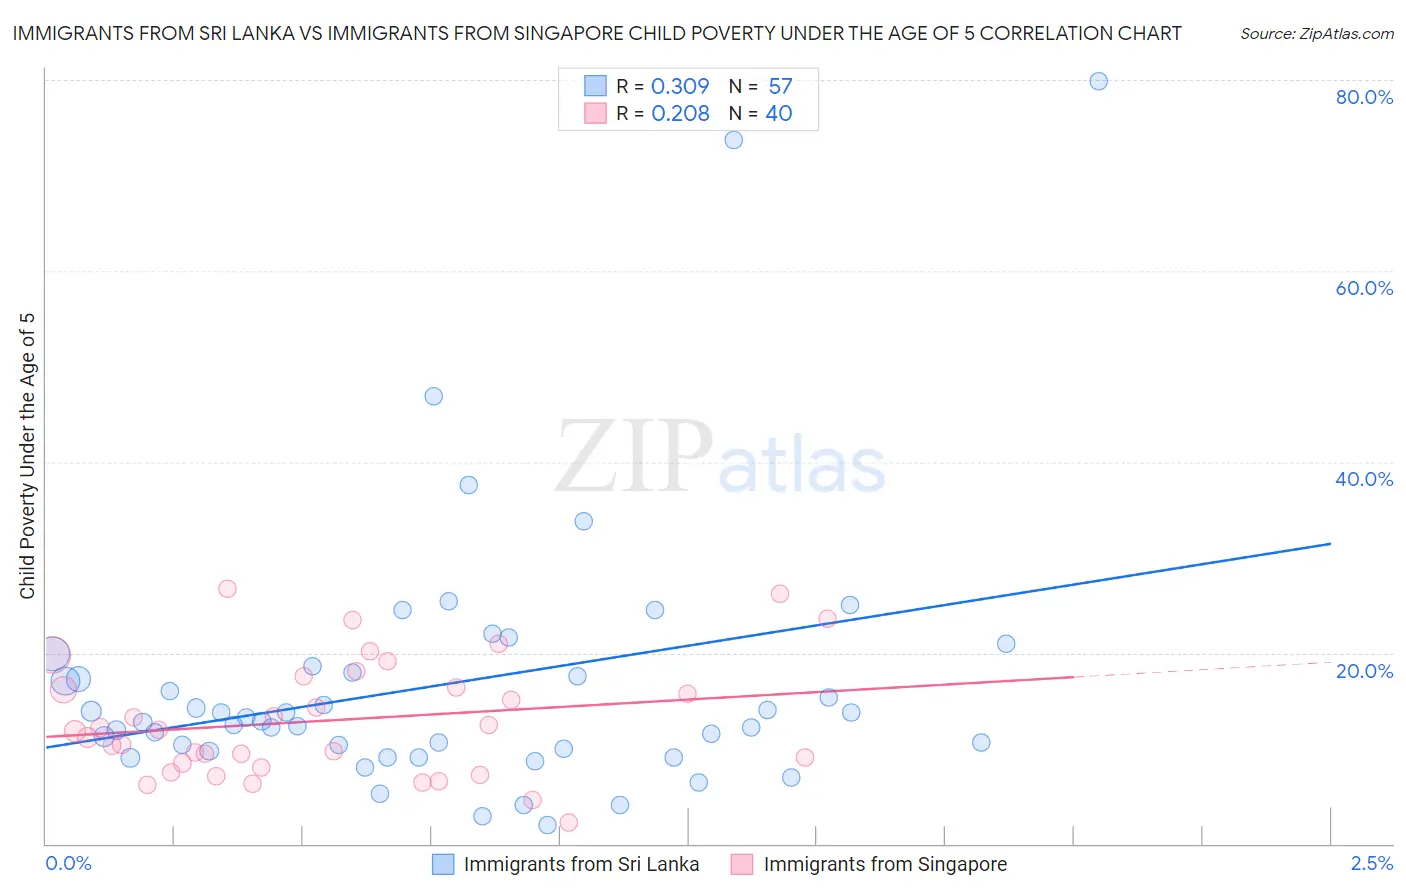 Immigrants from Sri Lanka vs Immigrants from Singapore Child Poverty Under the Age of 5